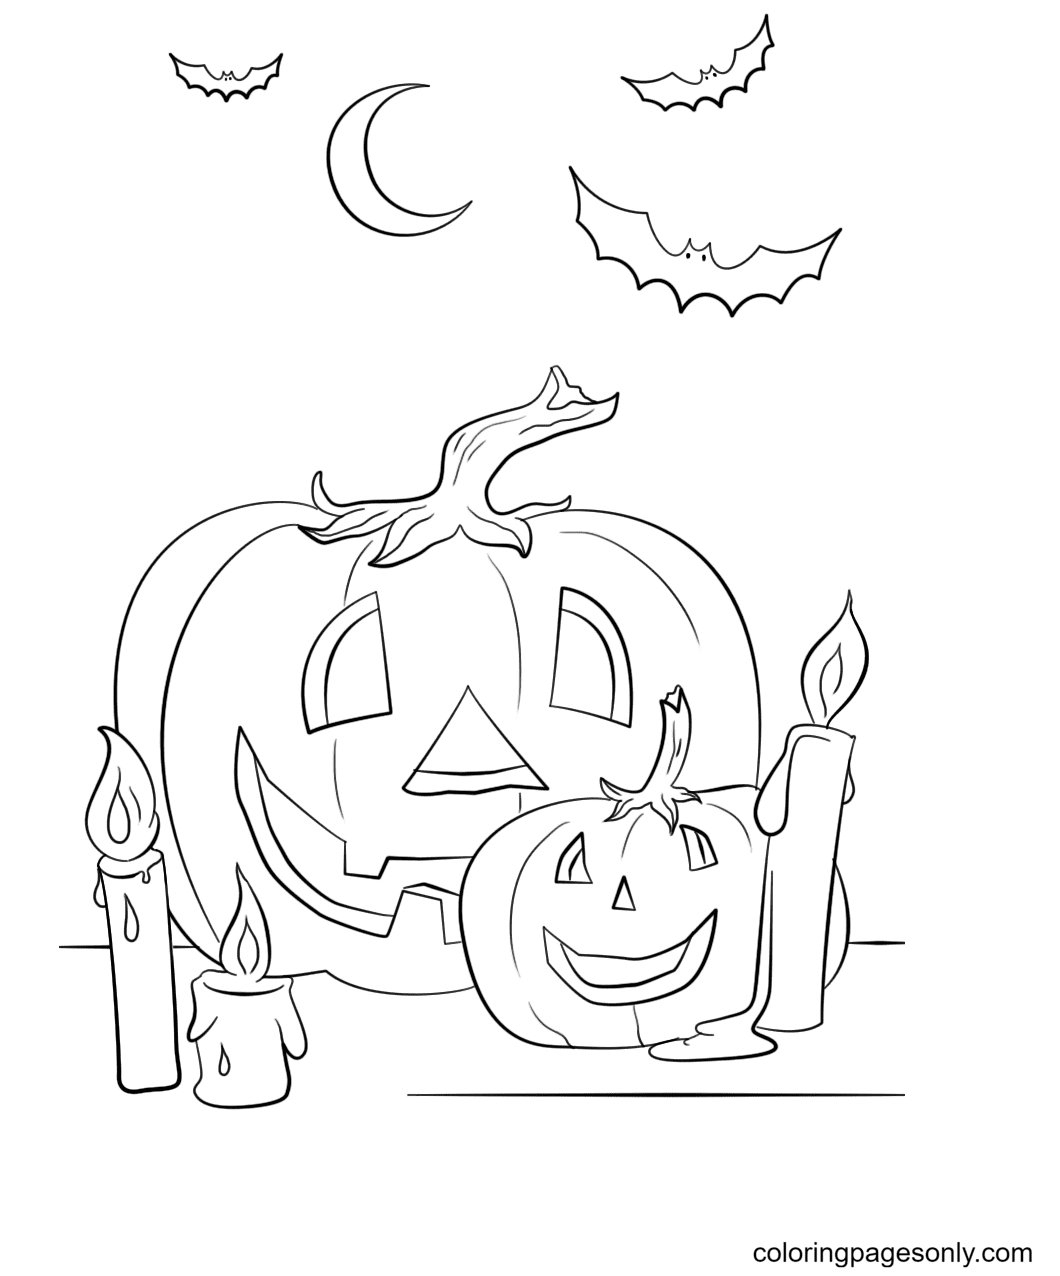 Halloween Scene with Pumpkins, Candles and Bats Coloring Page